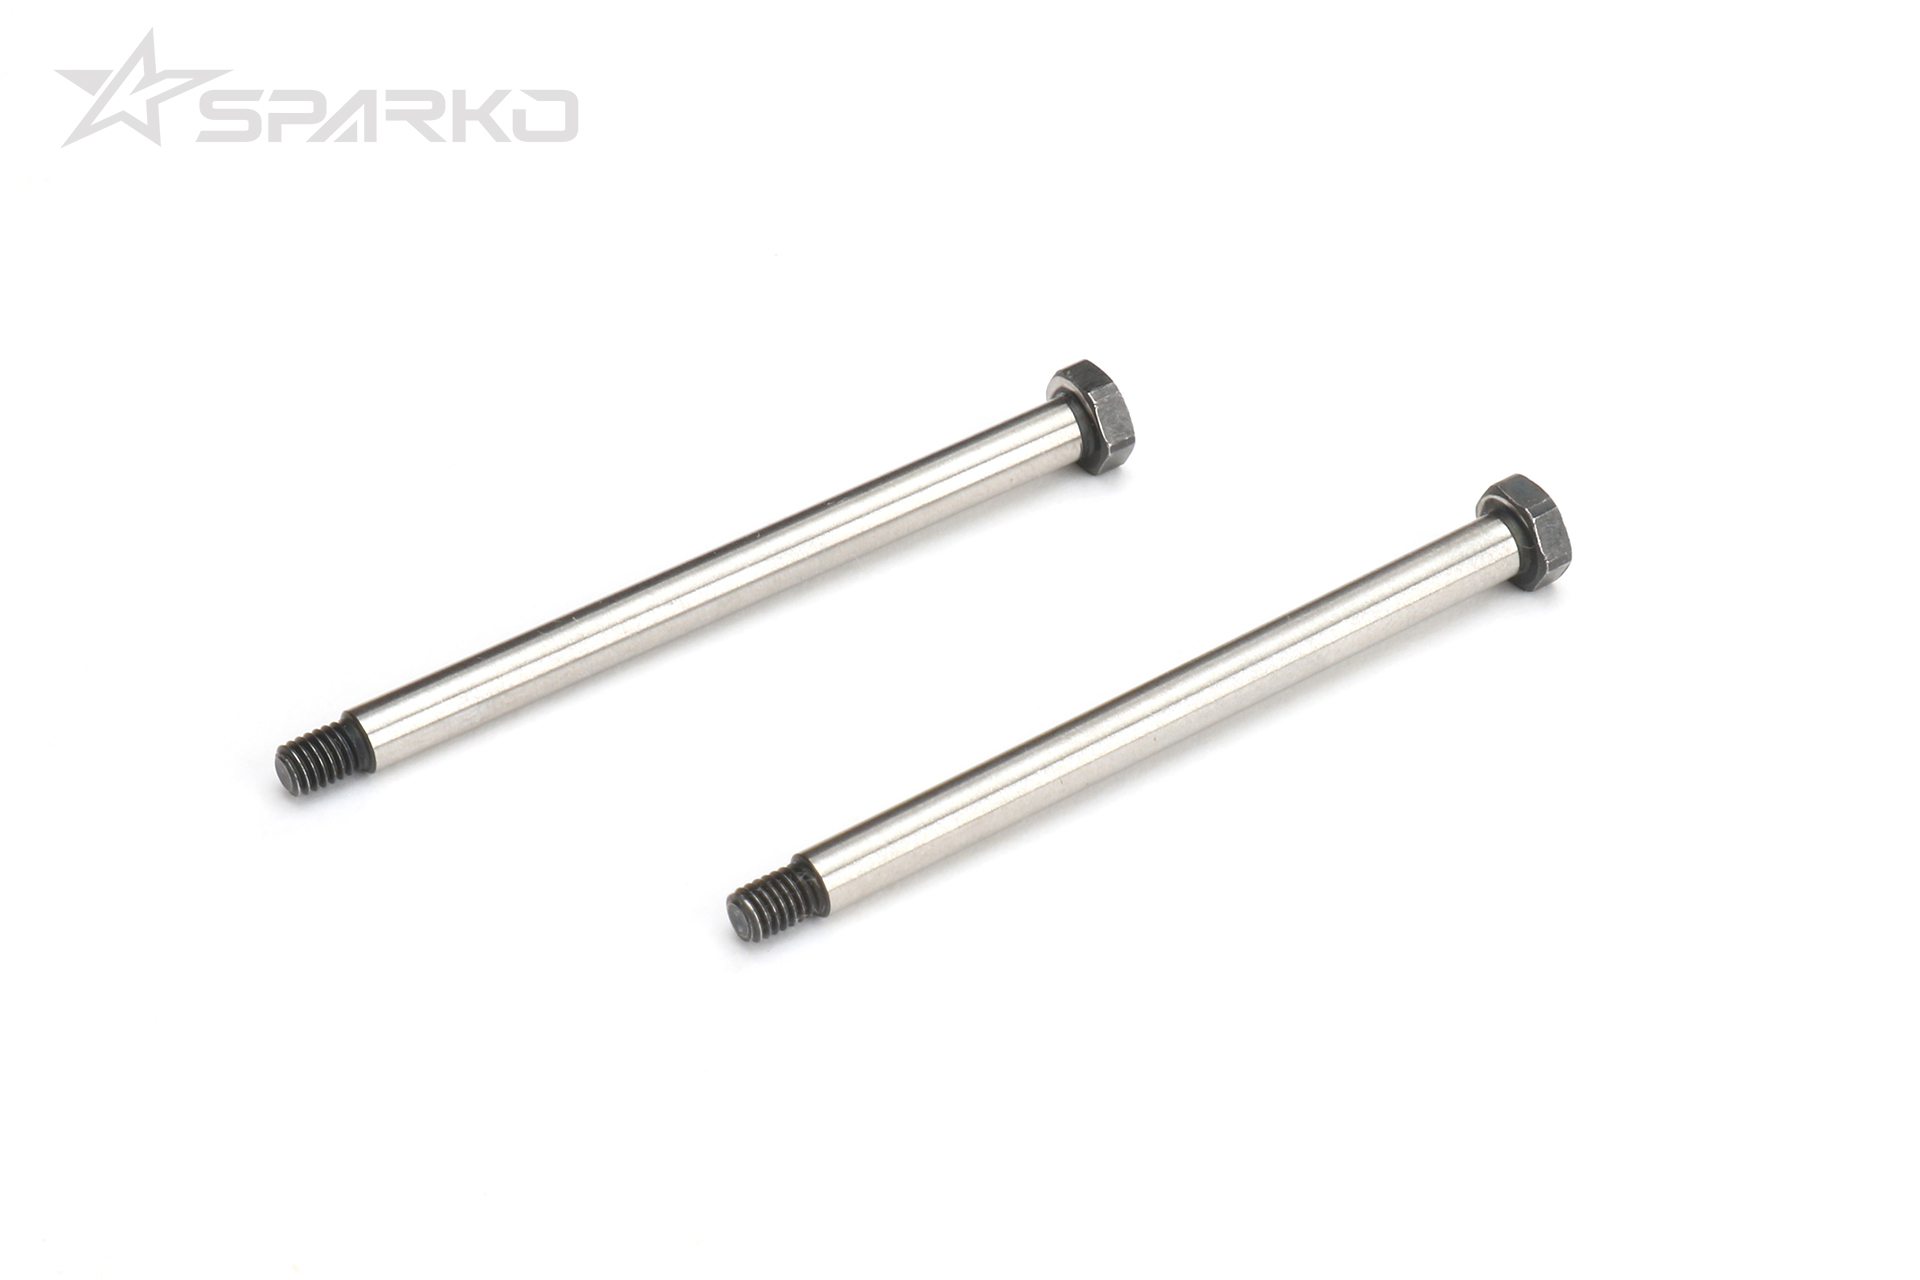 Rear Outter Hinge Pins (2pcs)